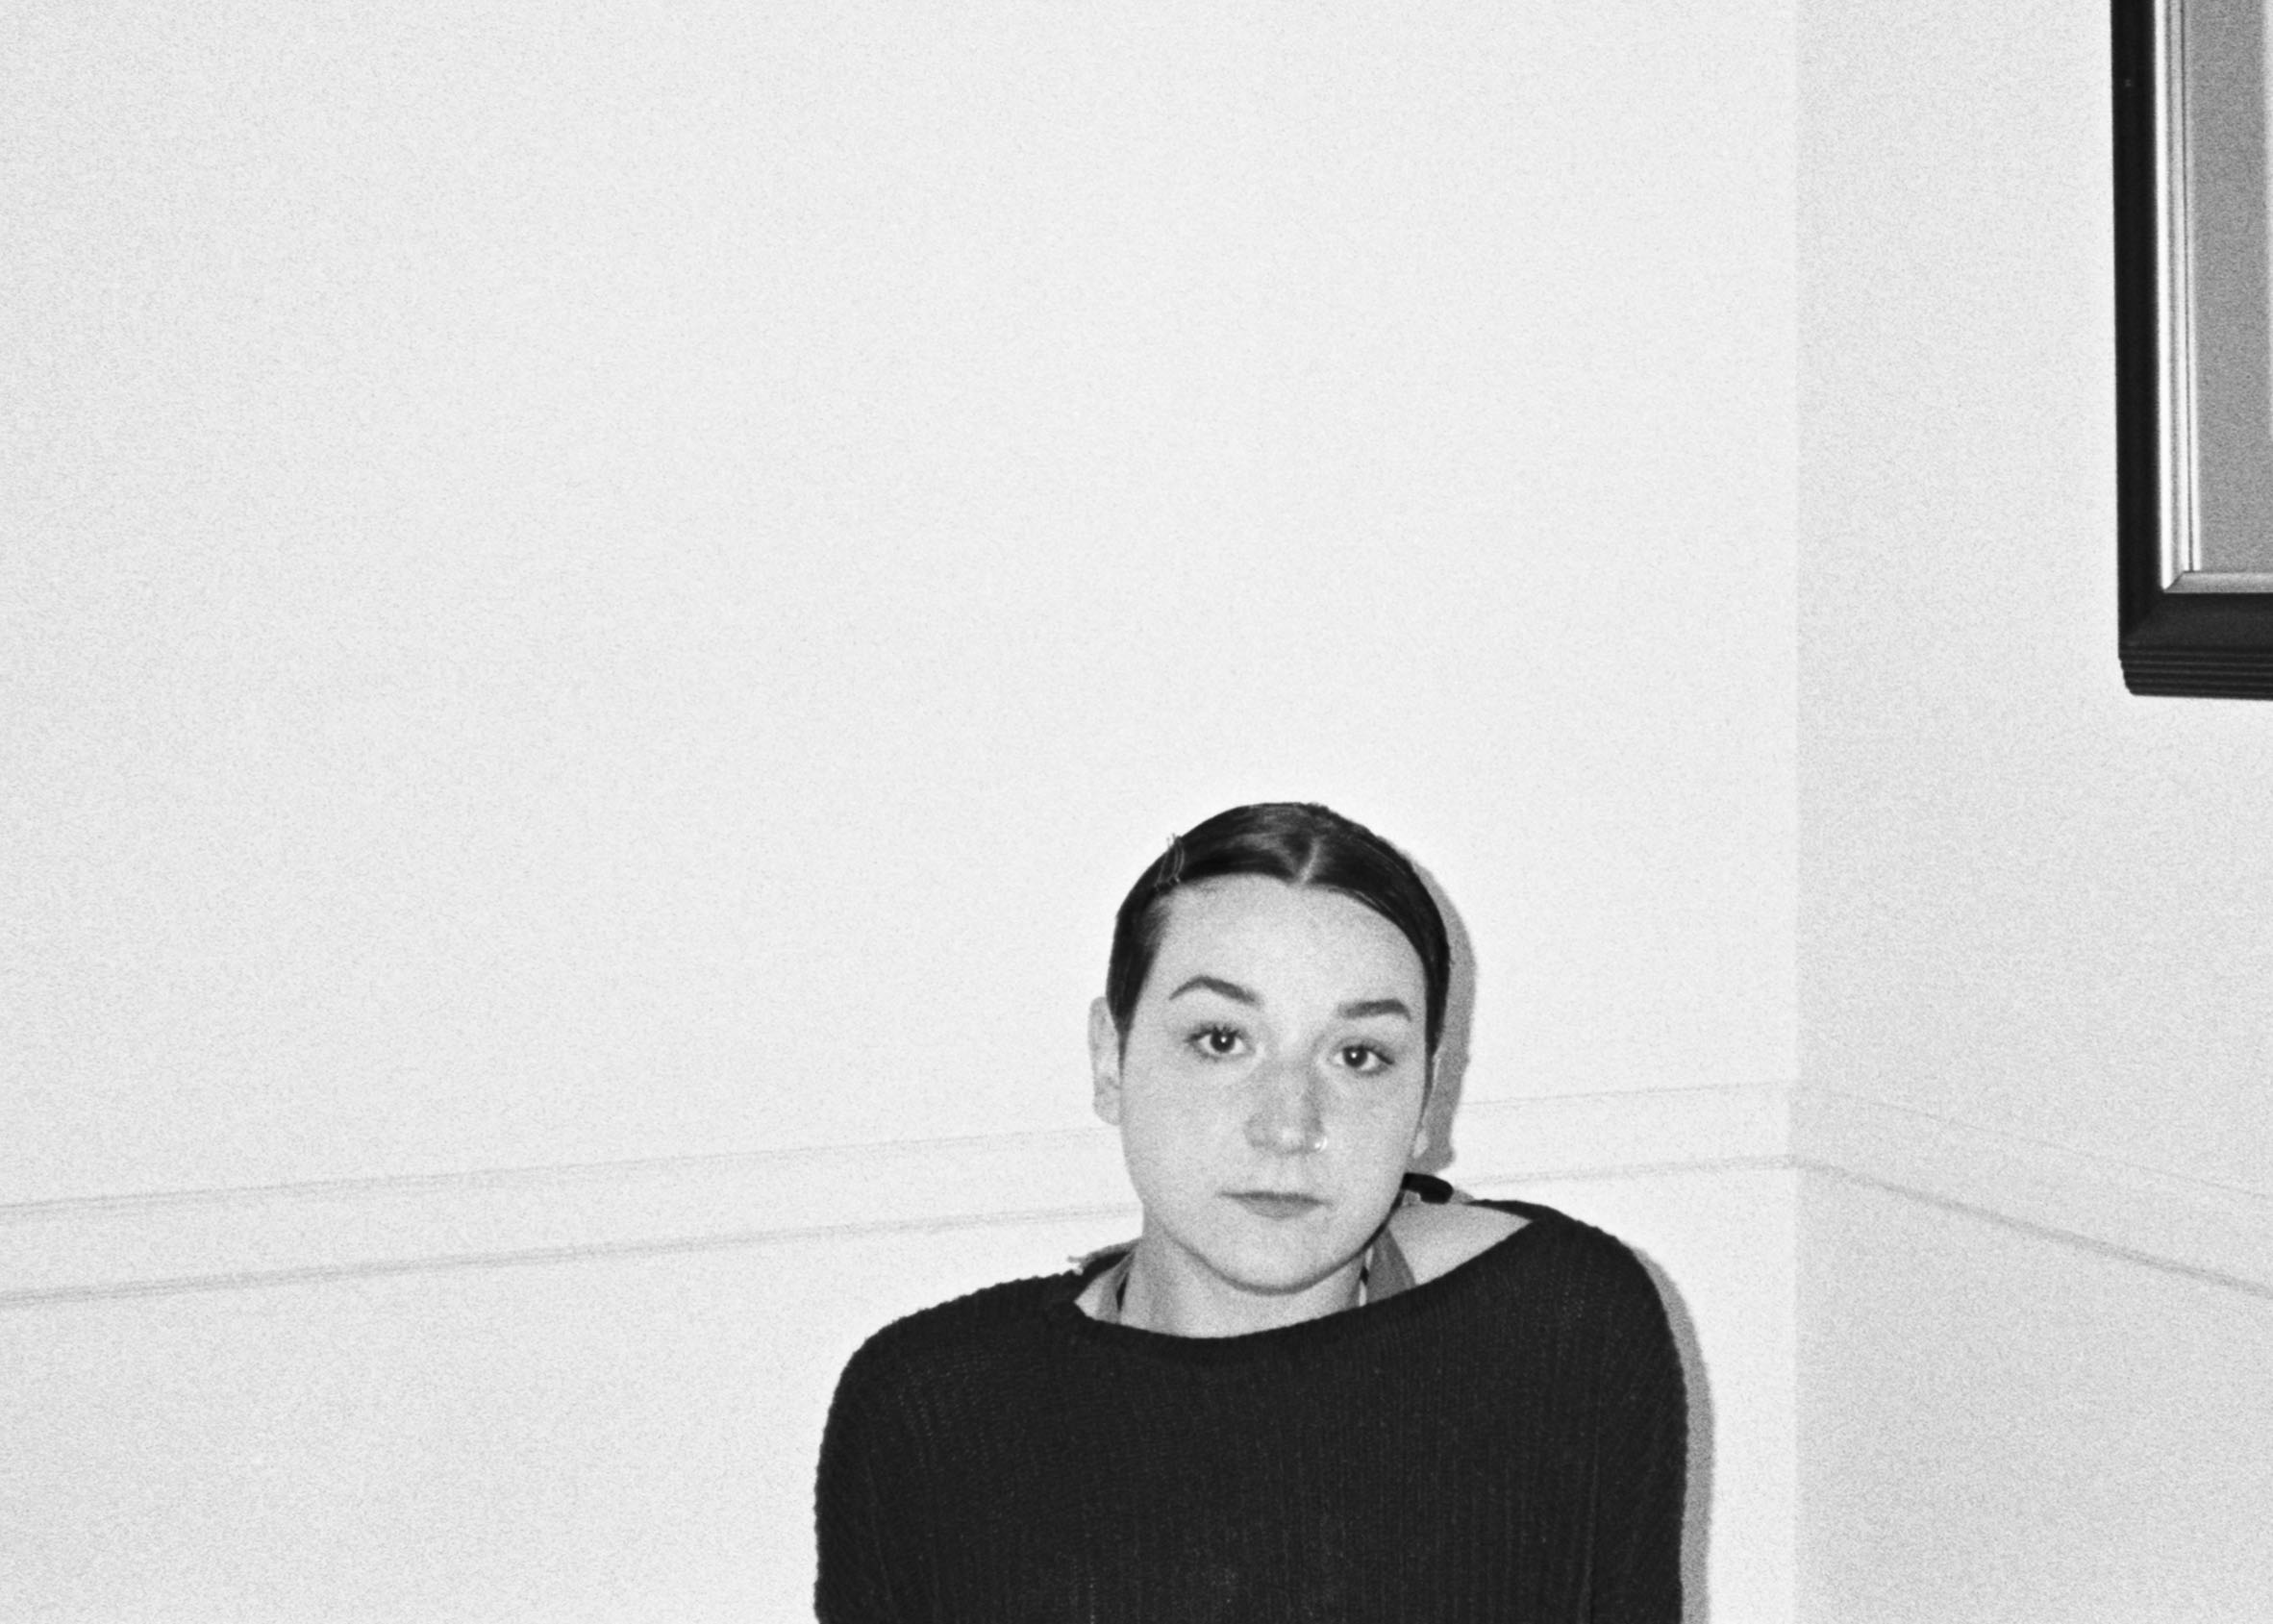 black and white photo of young woman sitting in empty white room wearing a black sweatshirt